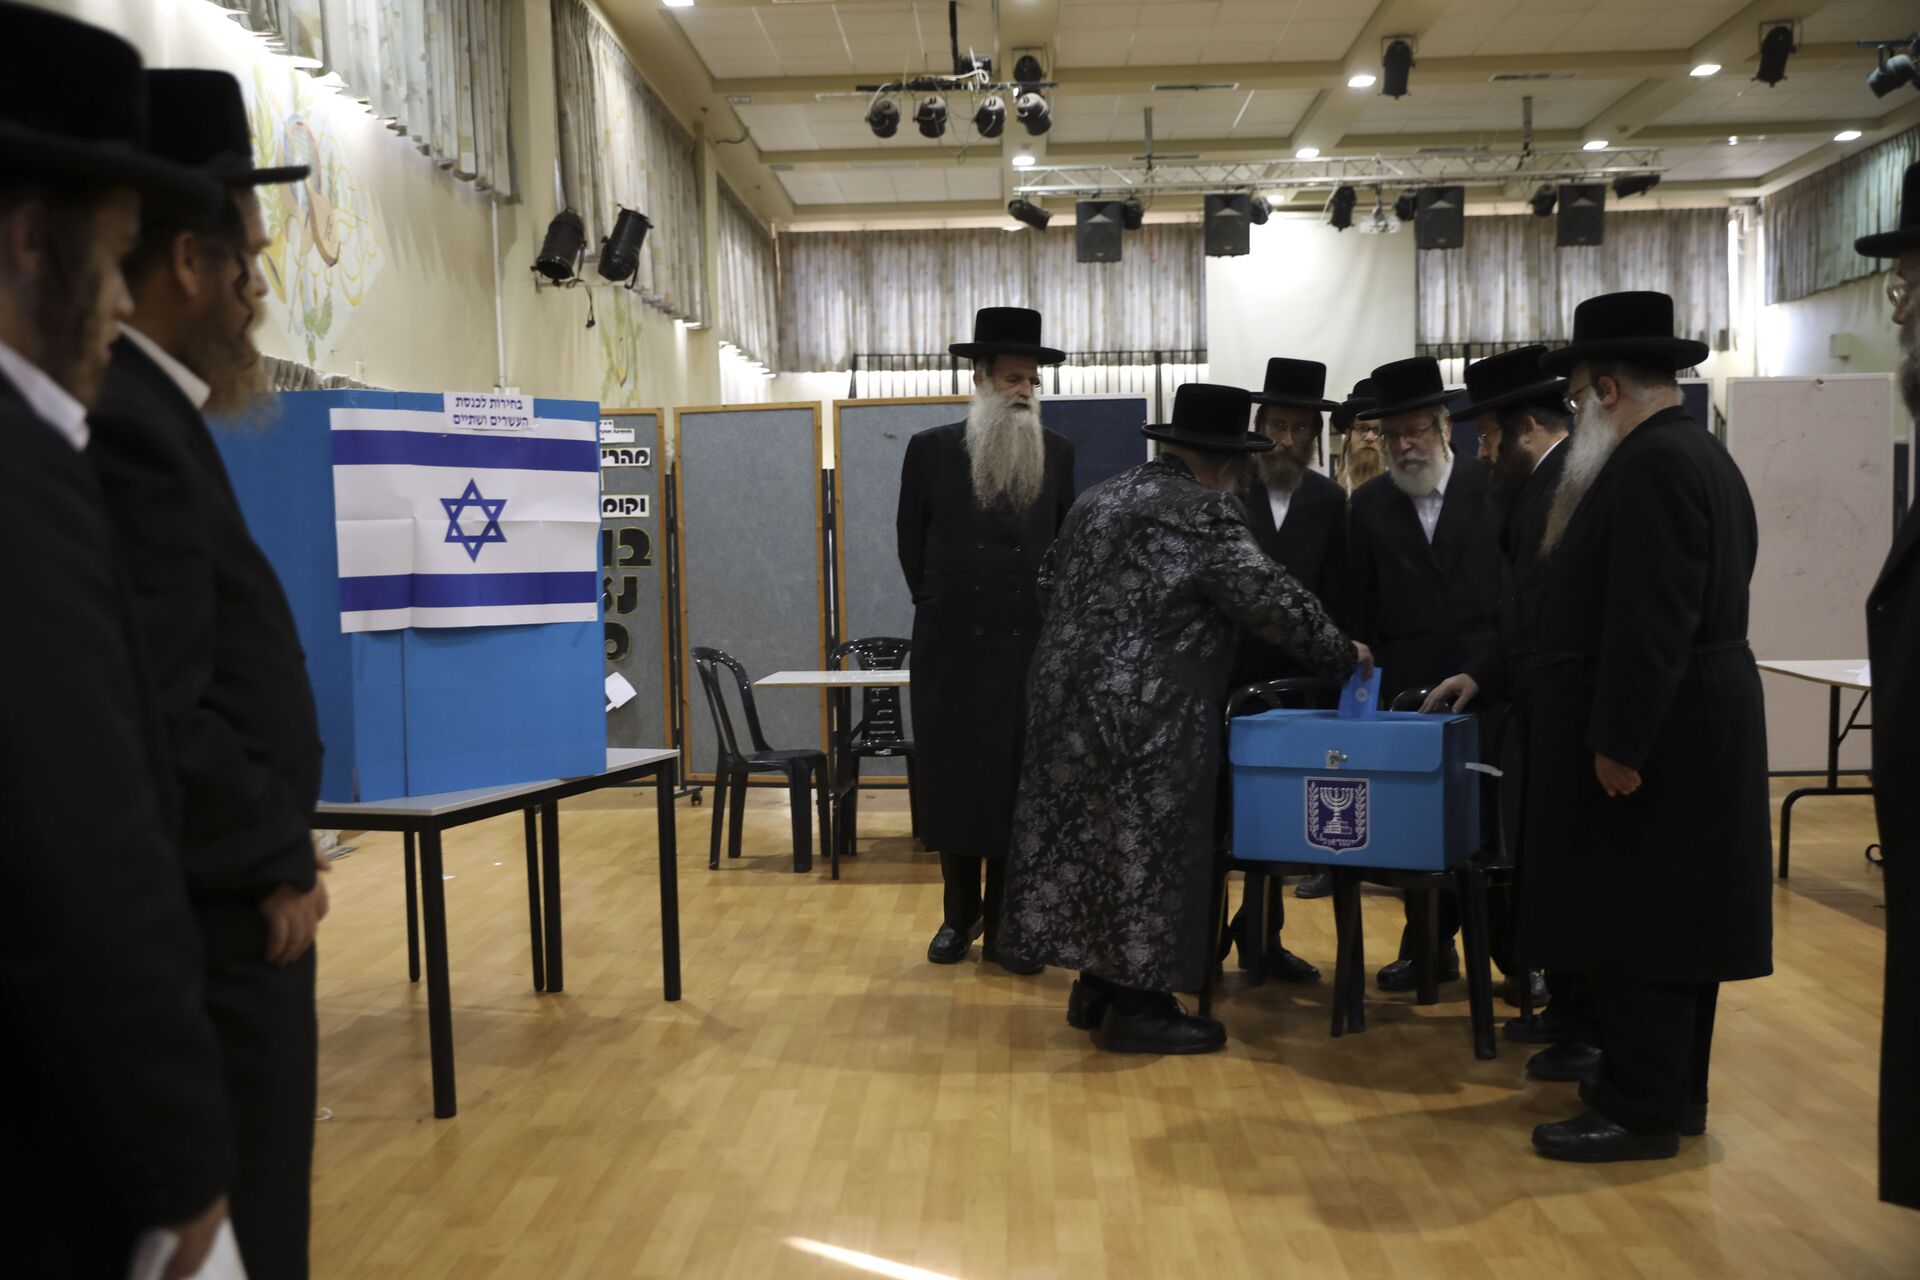 FILE - In this Tuesday, Sept. 17, 2019 file photo, ultra-Orthodox Jews watch Rabbi Israel Hager vote in Bnei Brak, Israel. Prime Minister Benjamin Netanyahu has called on his rival, Benny Gantz, to join a unity government, after unprecedented repeat elections returned a near tie between the two main parties. - Sputnik International, 1920, 26.10.2021